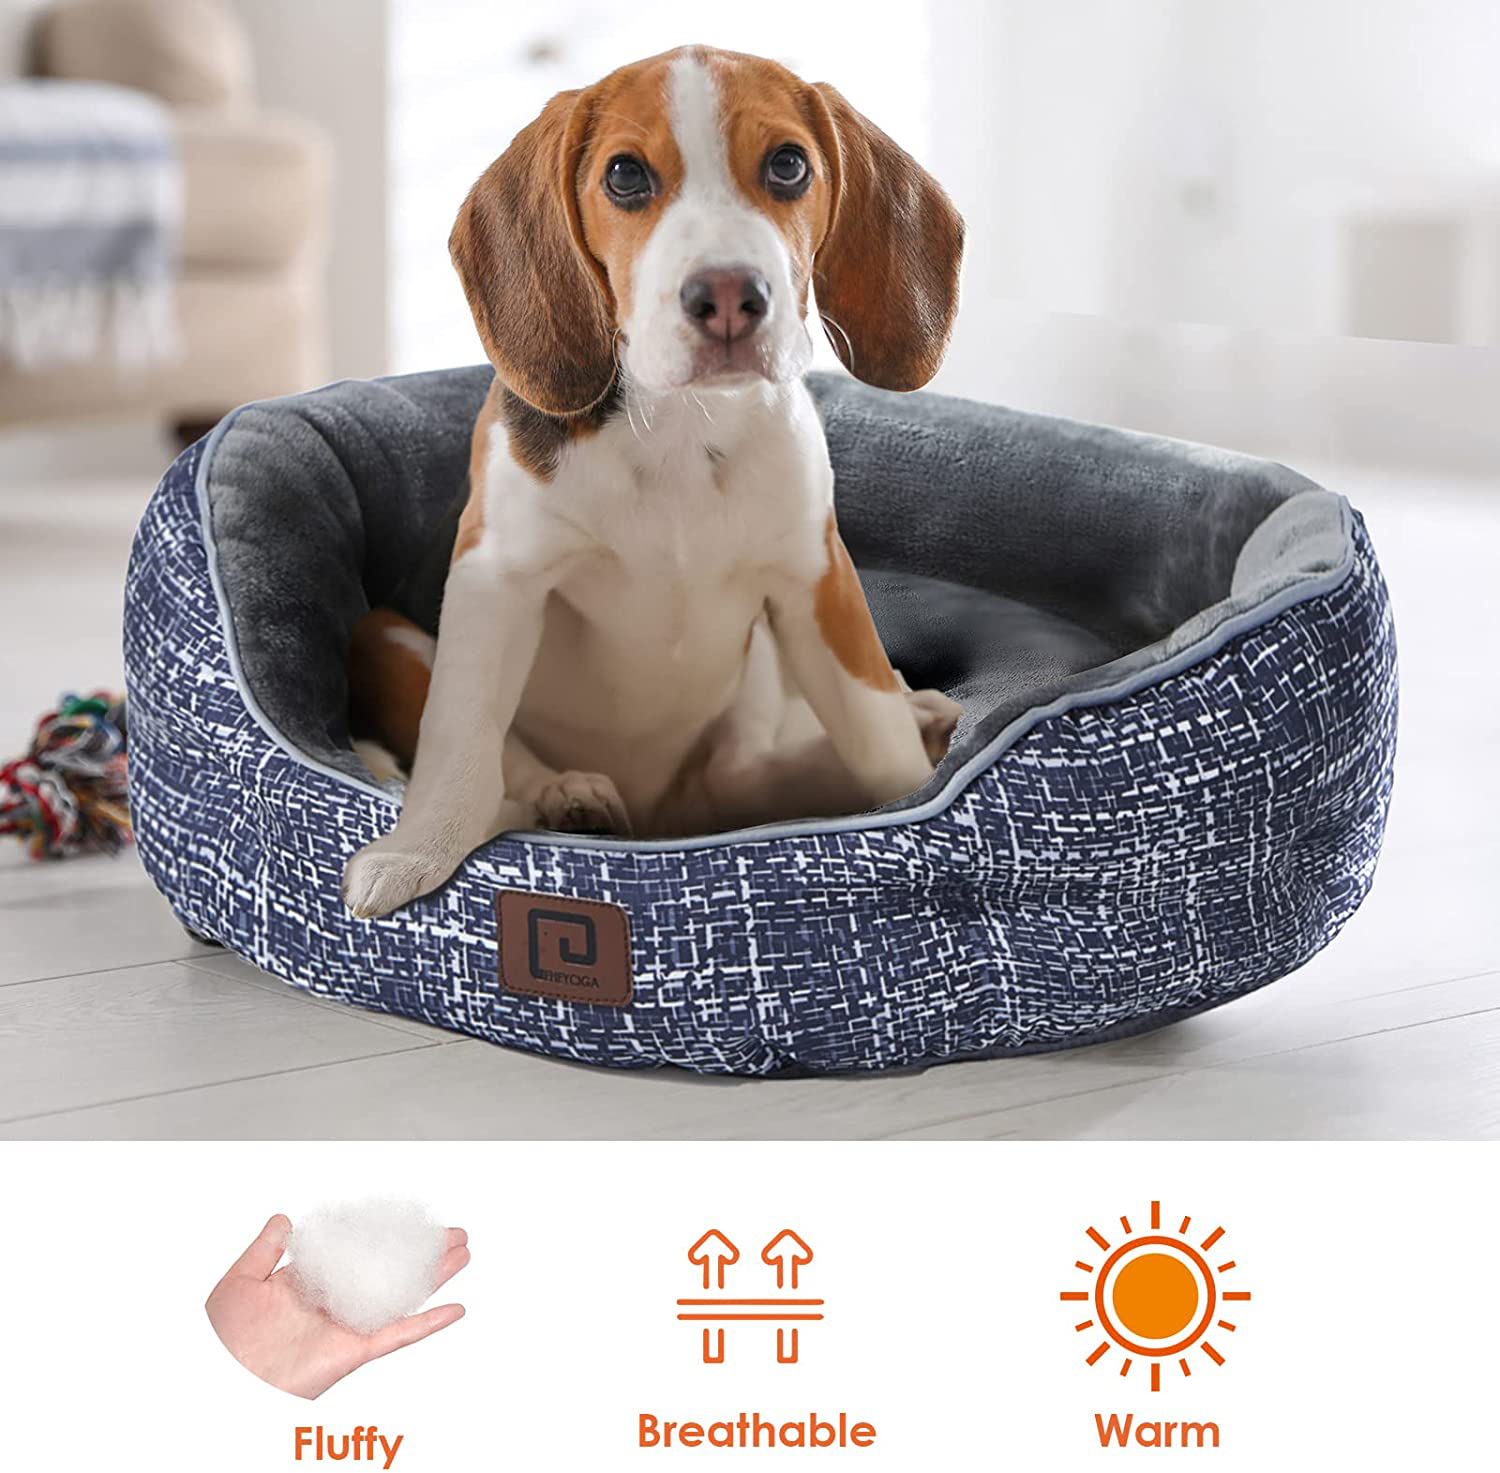 EHEYCIGA Dog Beds for Indoor Small Dogs or Cats 20 Inches round Flannel Fbric with Anti-Slip Oxford Bottom, Machine Washable Dog Bed for All Seasons